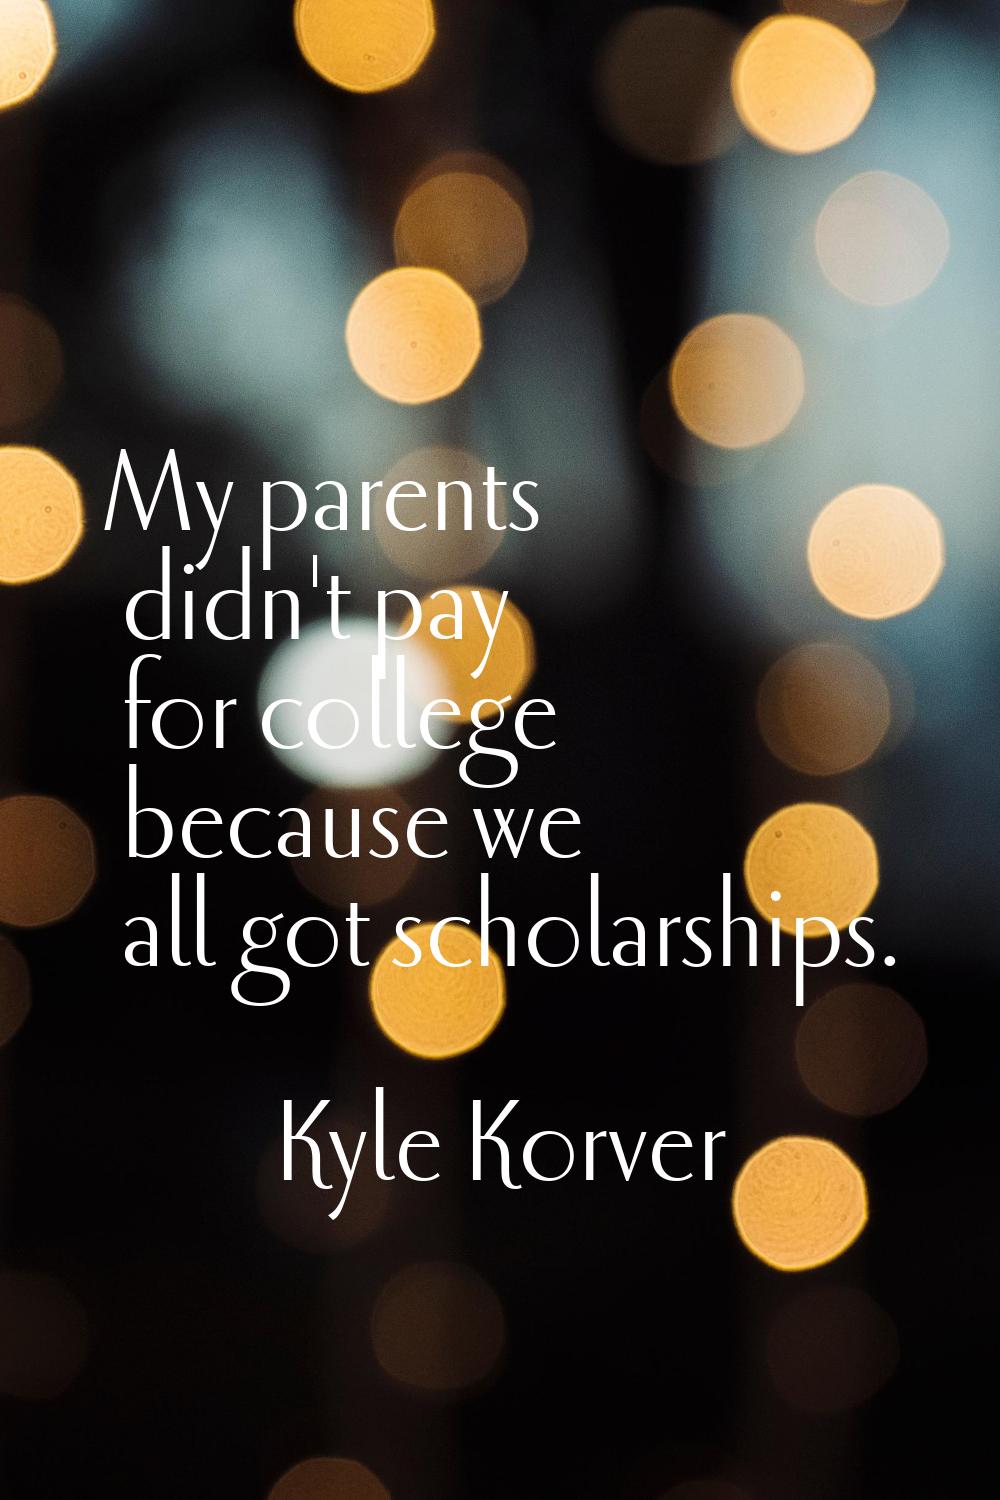 My parents didn't pay for college because we all got scholarships.